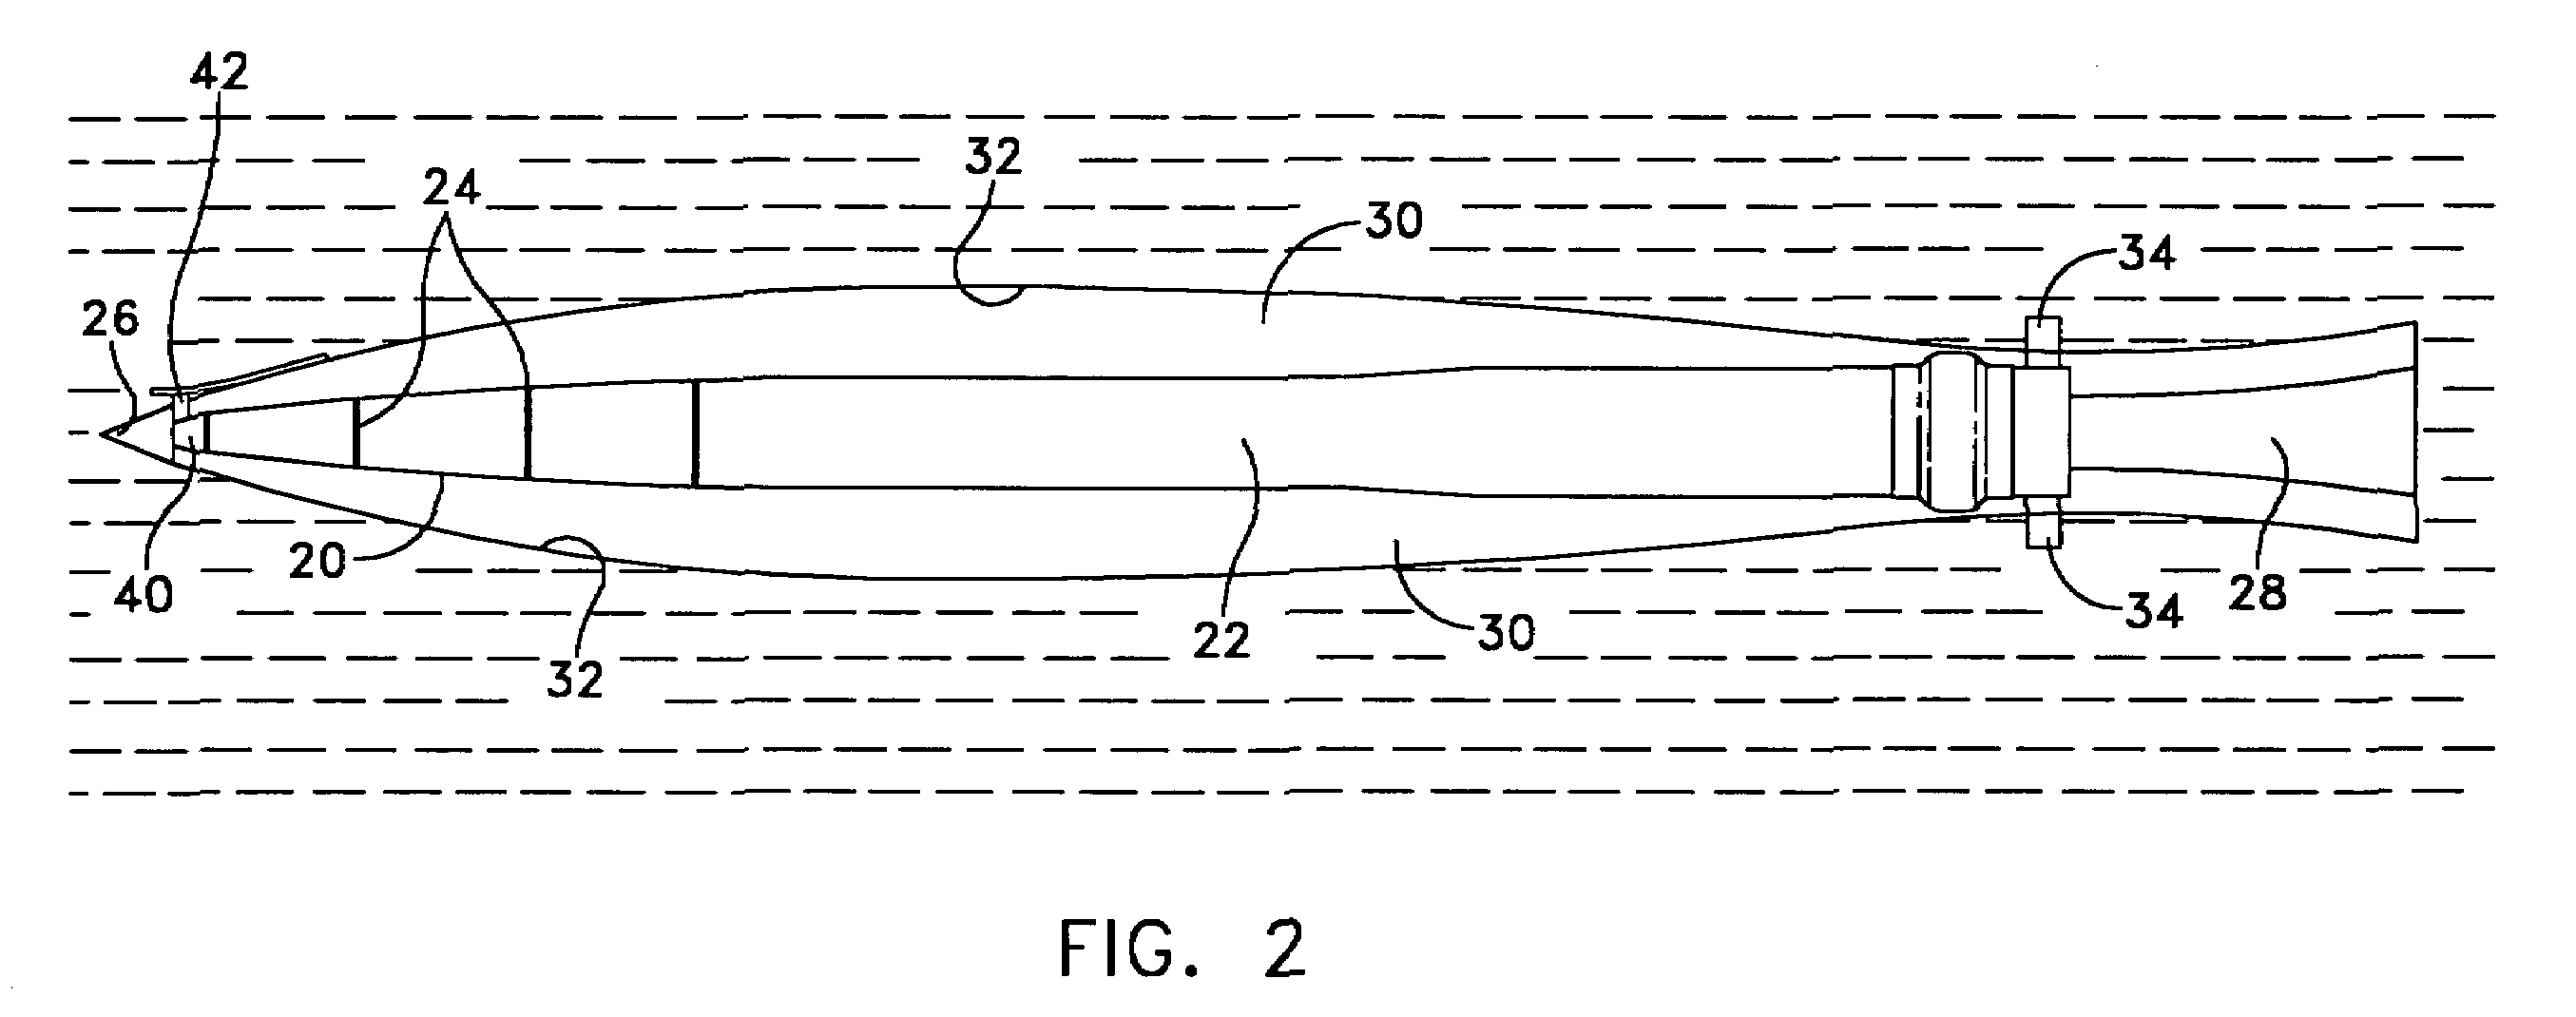 Assembly and method for determining speed of a supercavitating underwater vehicle